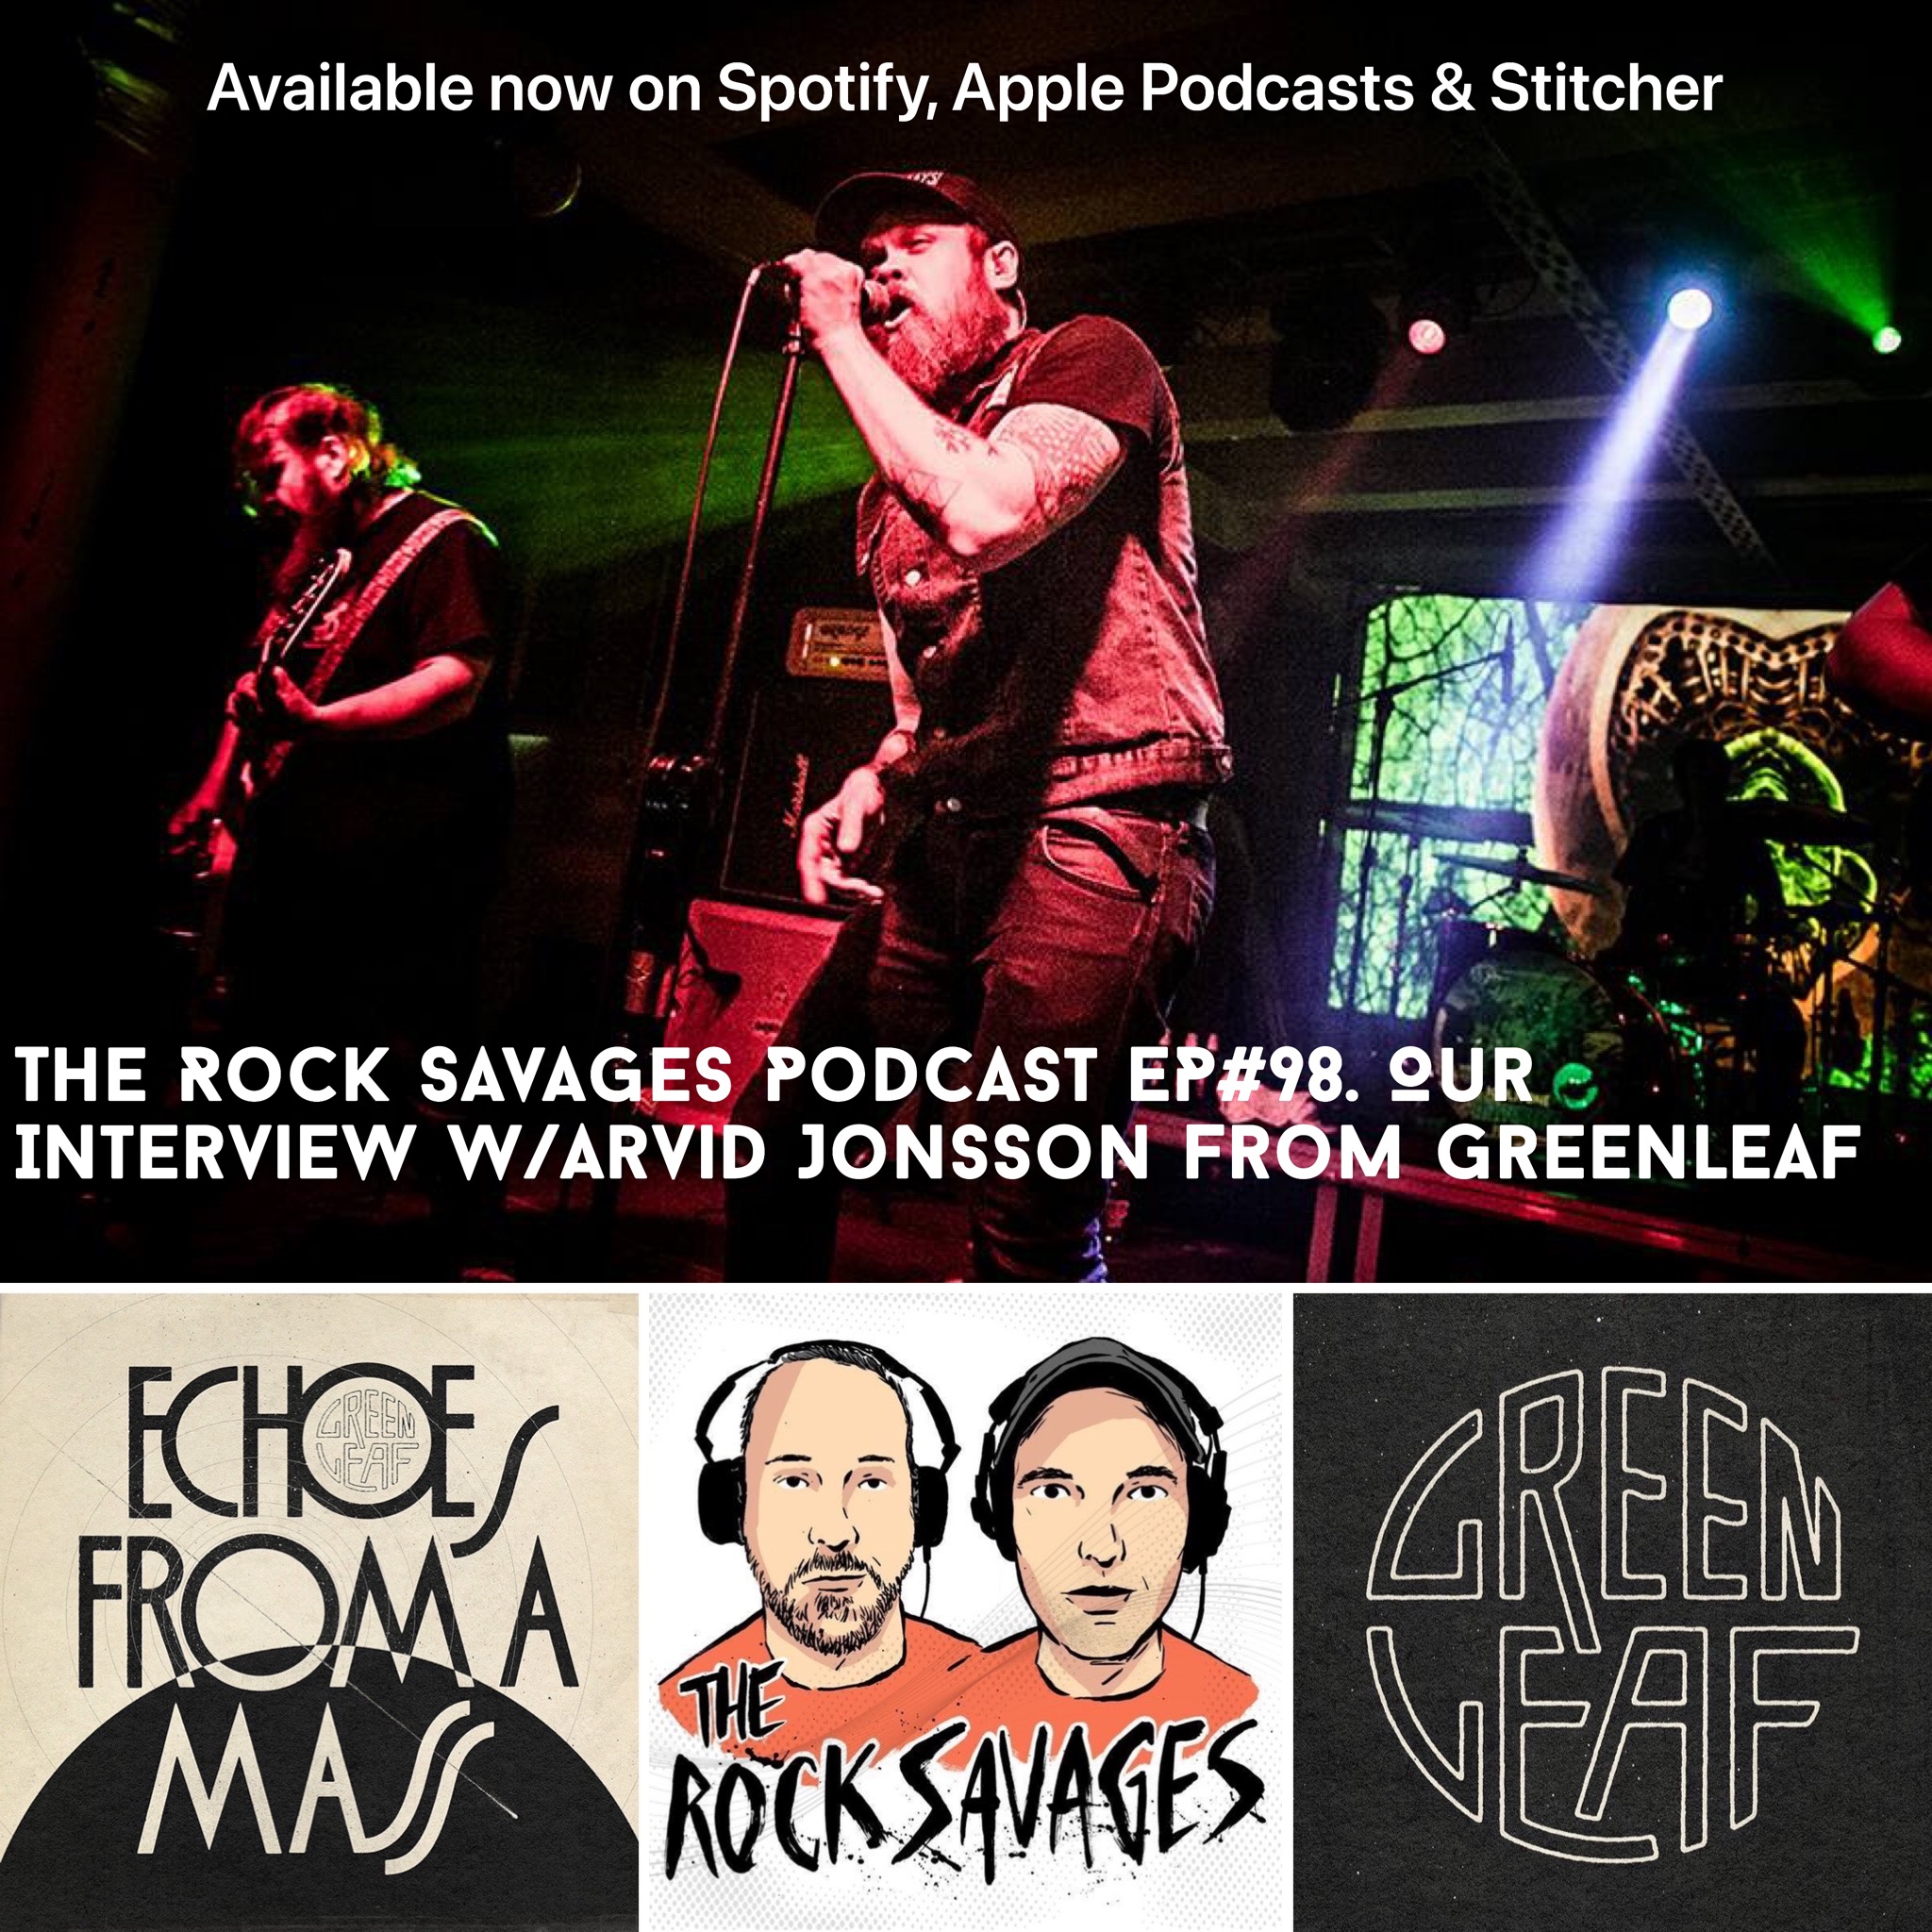 The Rock Savages Podcast Interview Swedish Rock Band "Greenleaf"